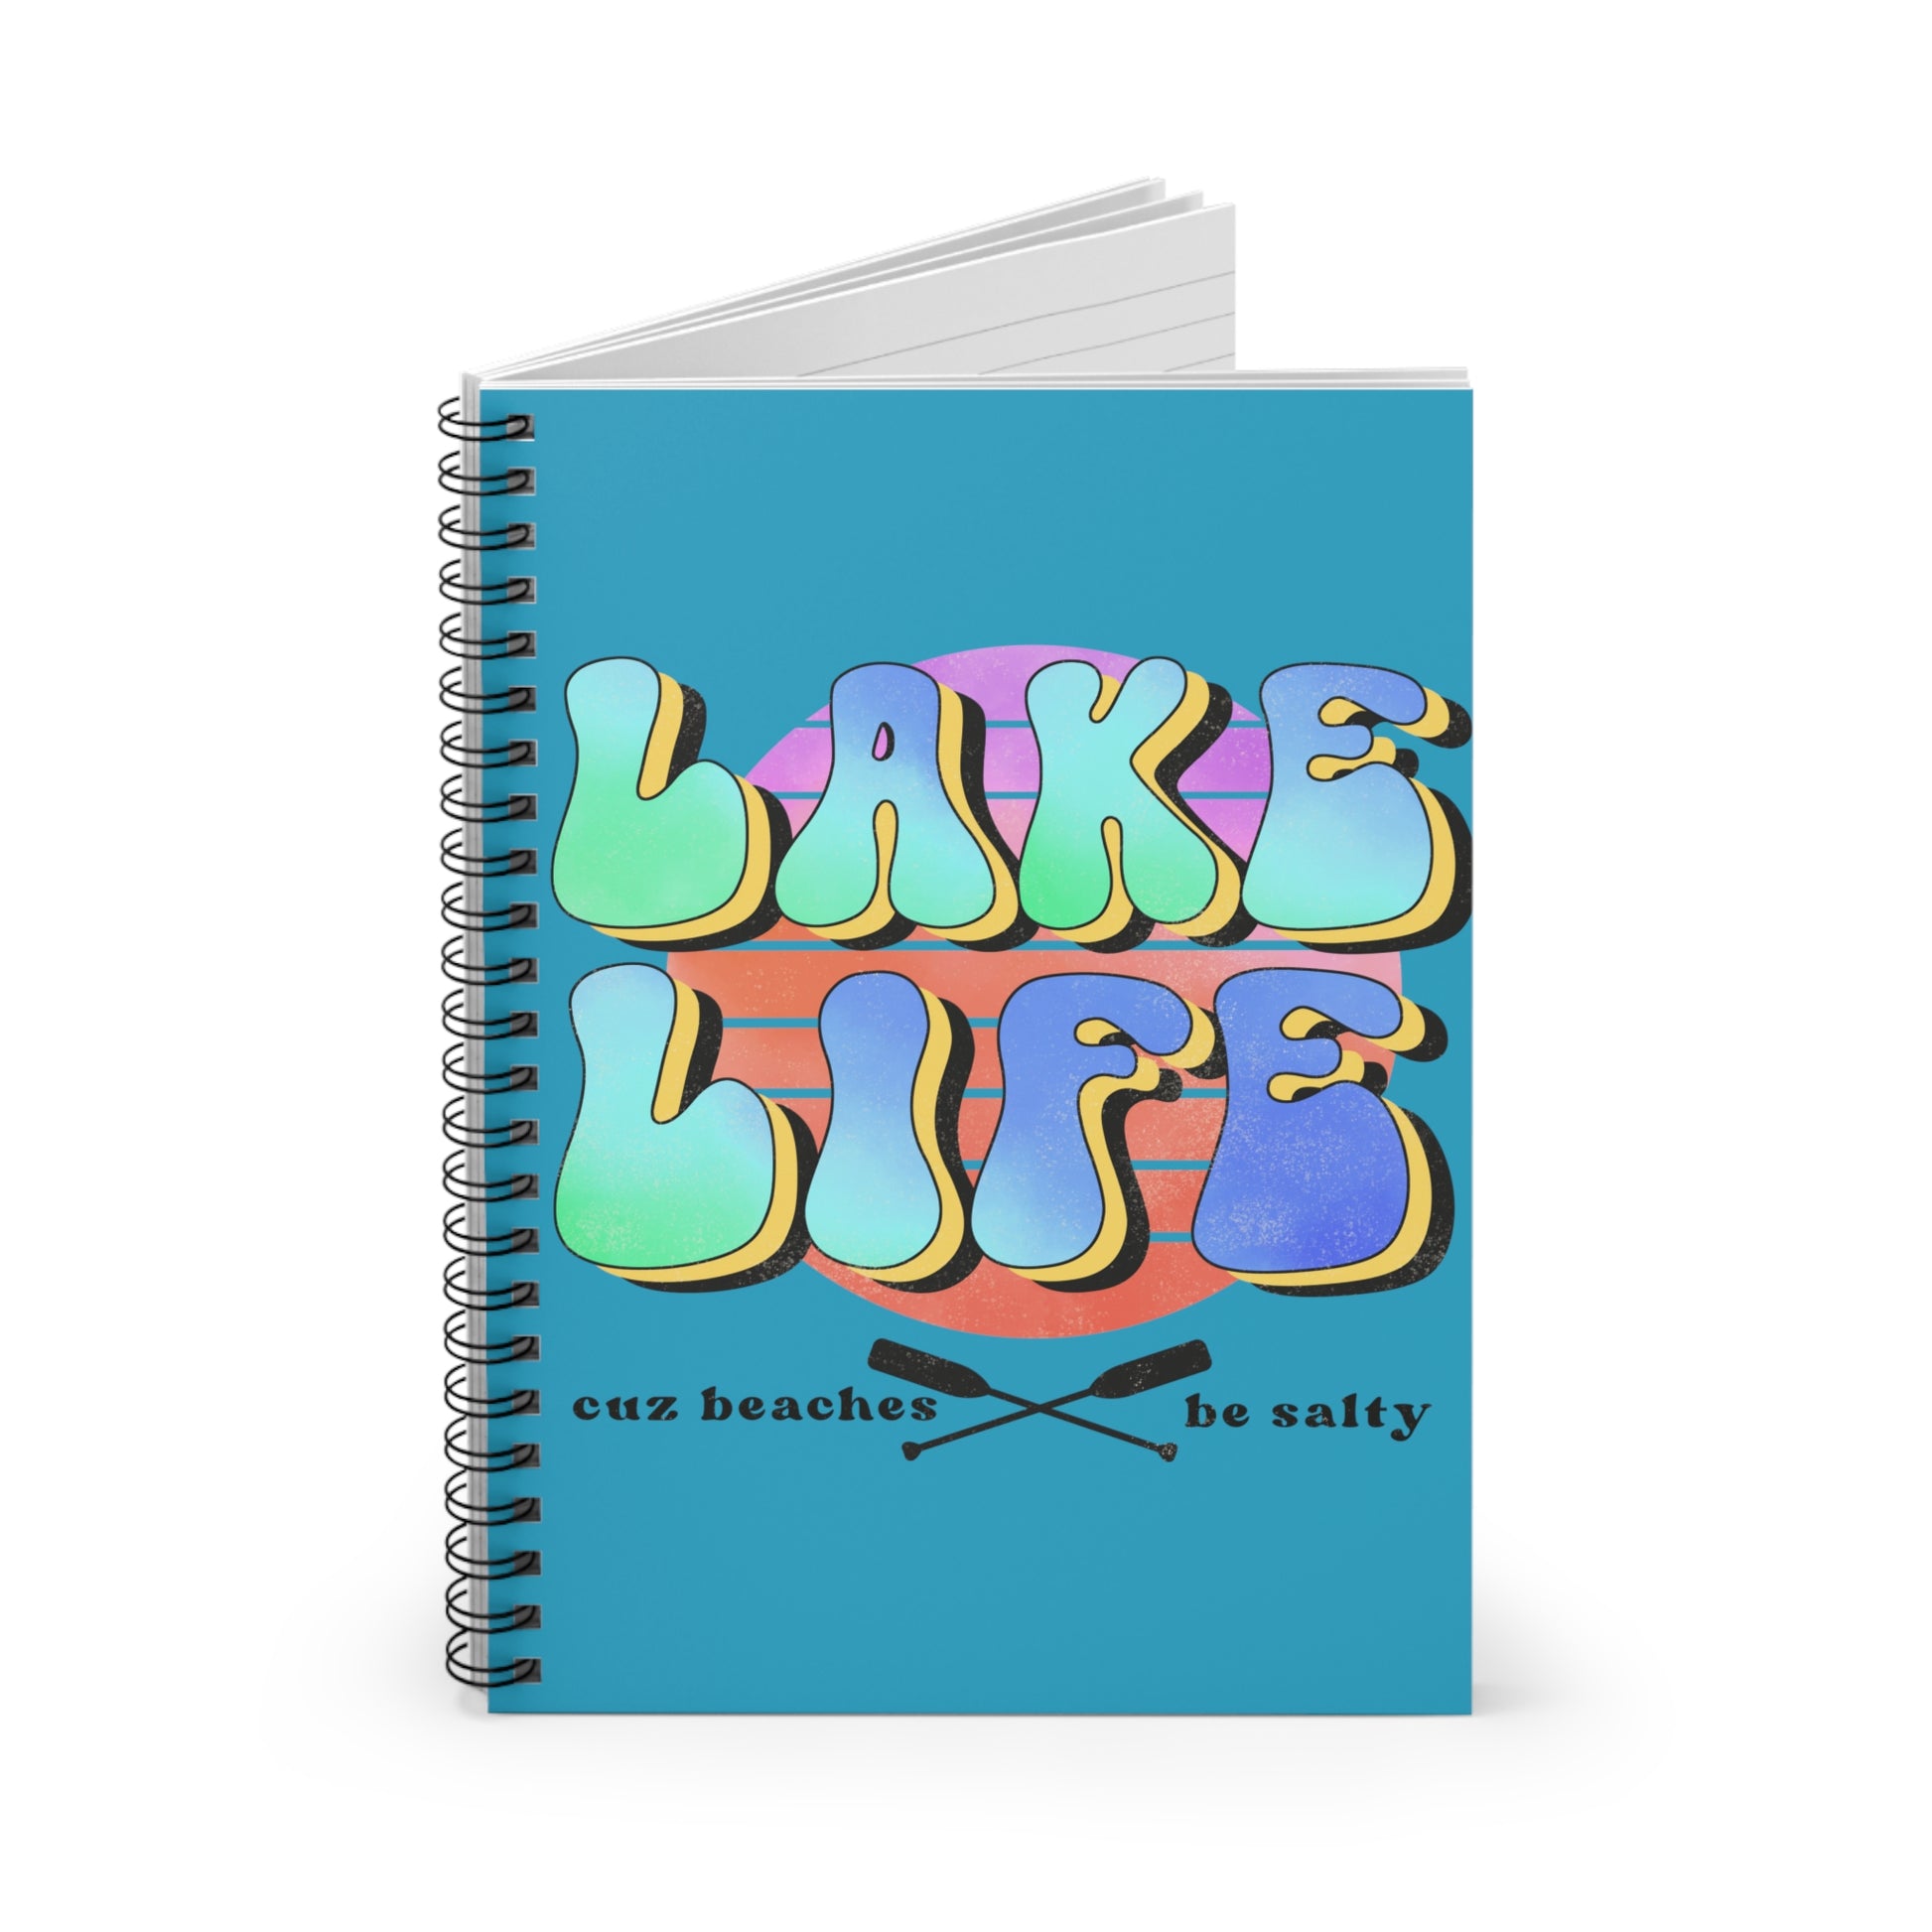 Lake Life: Spiral Notebook - Log Books - Journals - Diaries - and More Custom Printed by TheGlassyLass